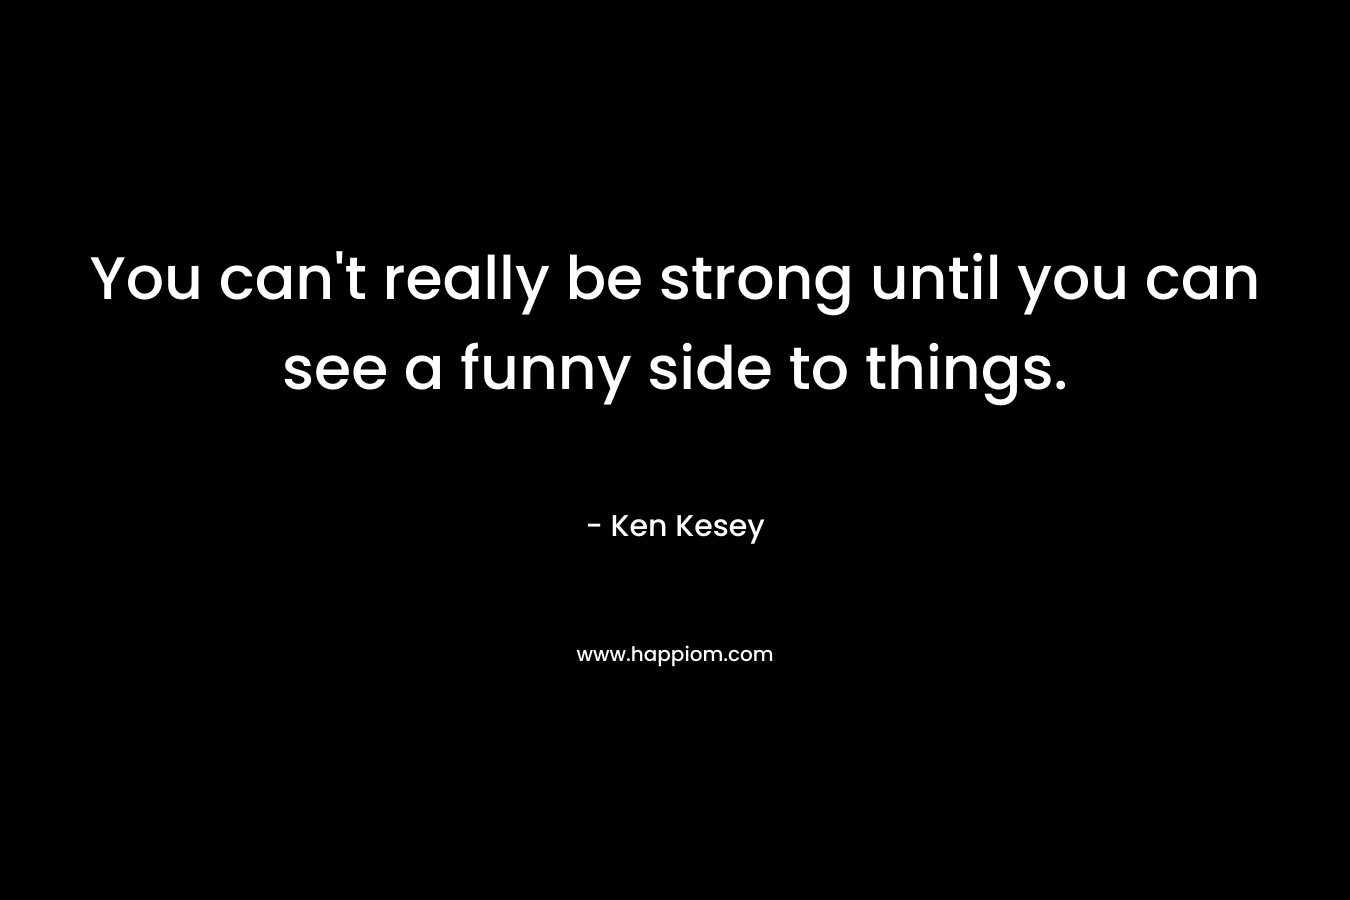 You can't really be strong until you can see a funny side to things.